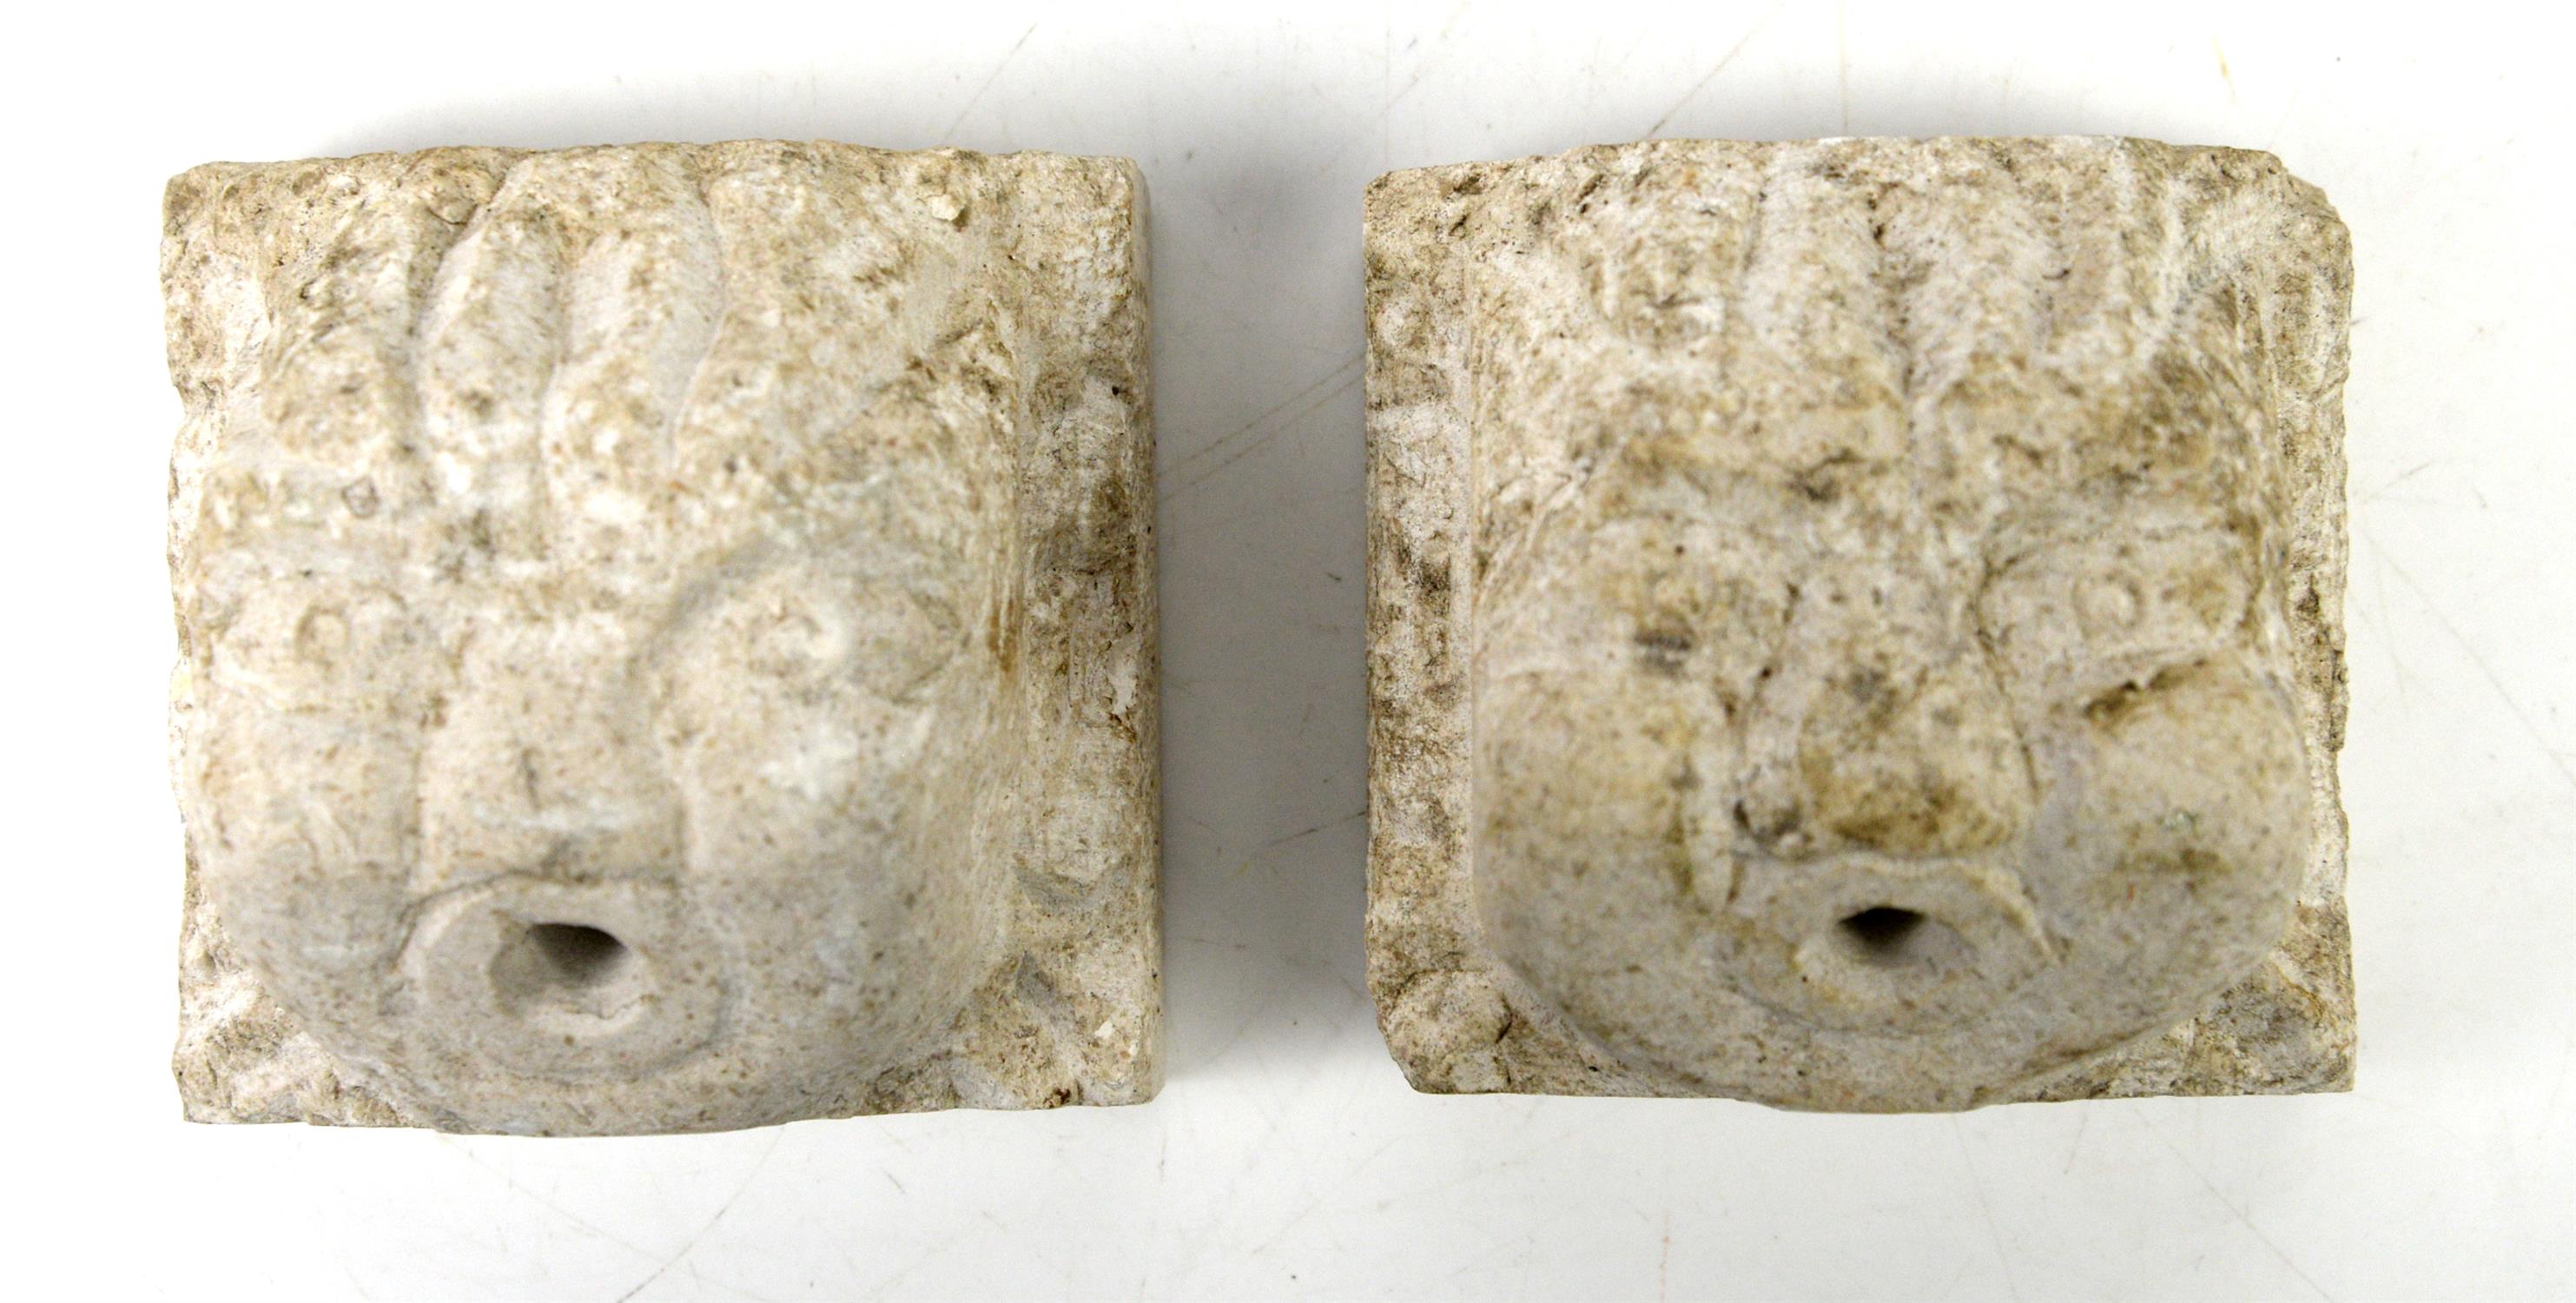 Pair of carved stone mask water spouts, h9.5cm x w10cm x d7.5cm,